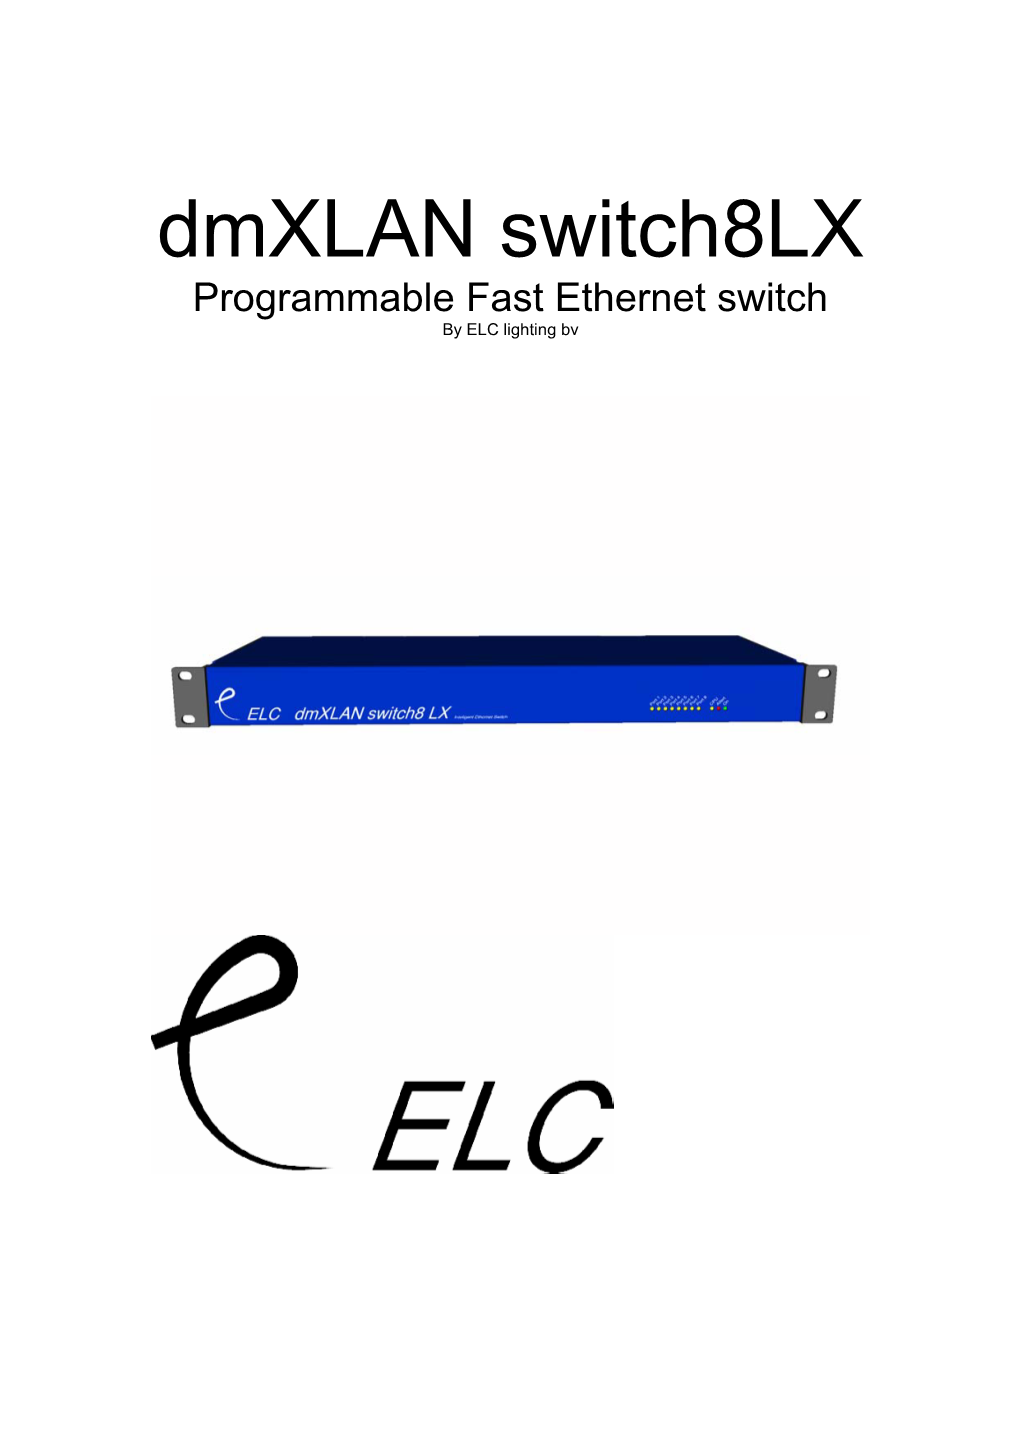 Dmxlan Switch8lx Programmable Fast Ethernet Switch by ELC Lighting Bv